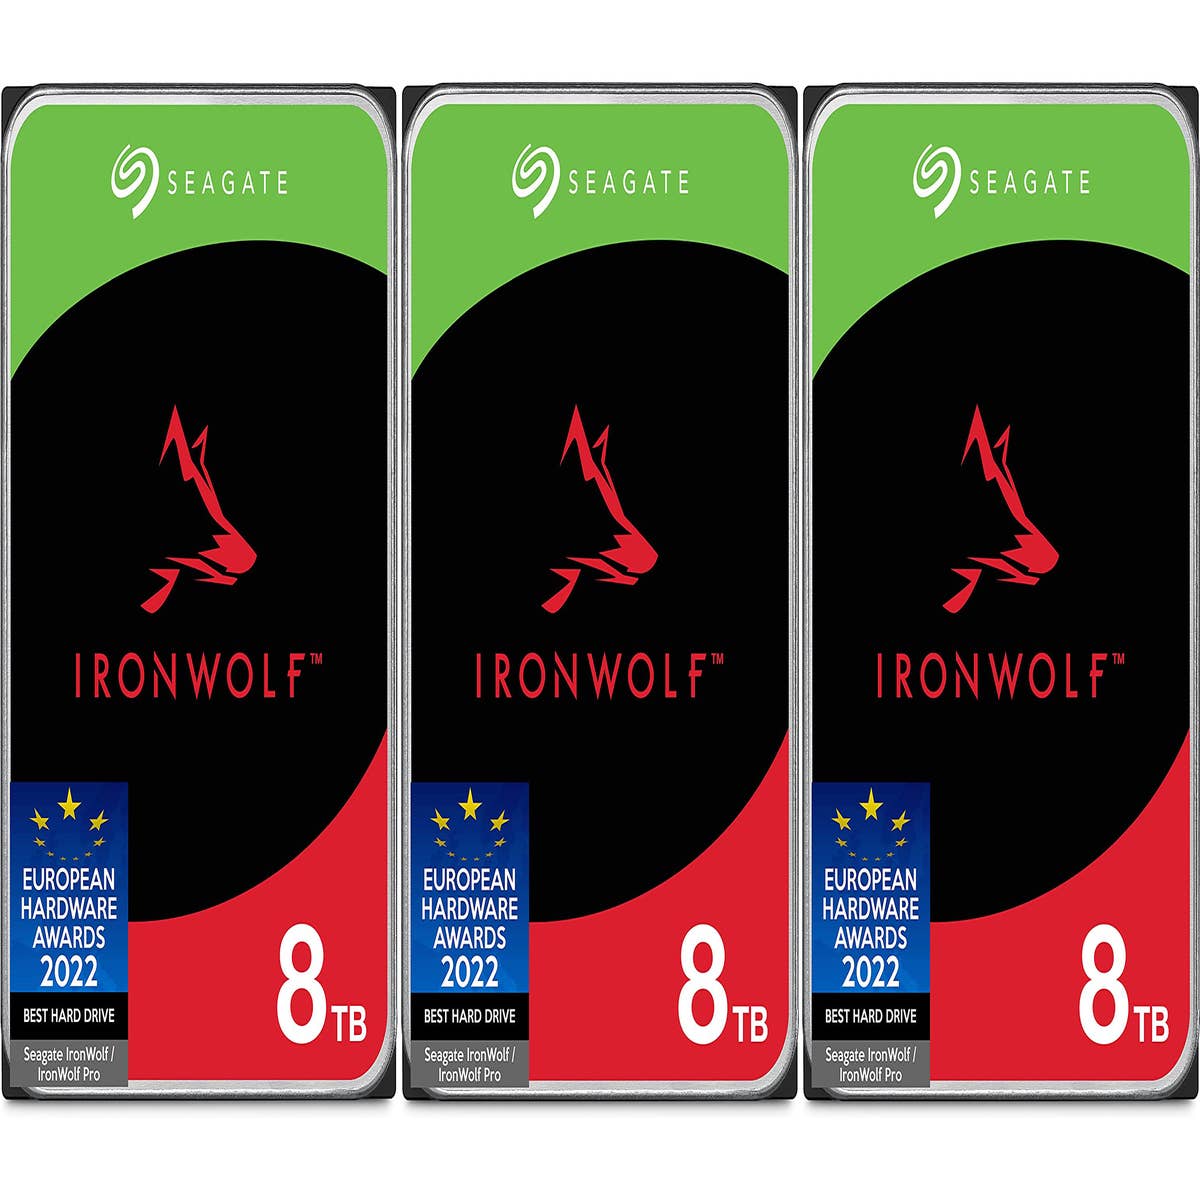 Store all the things with an 8TB Seagate IronWolf hard drive for